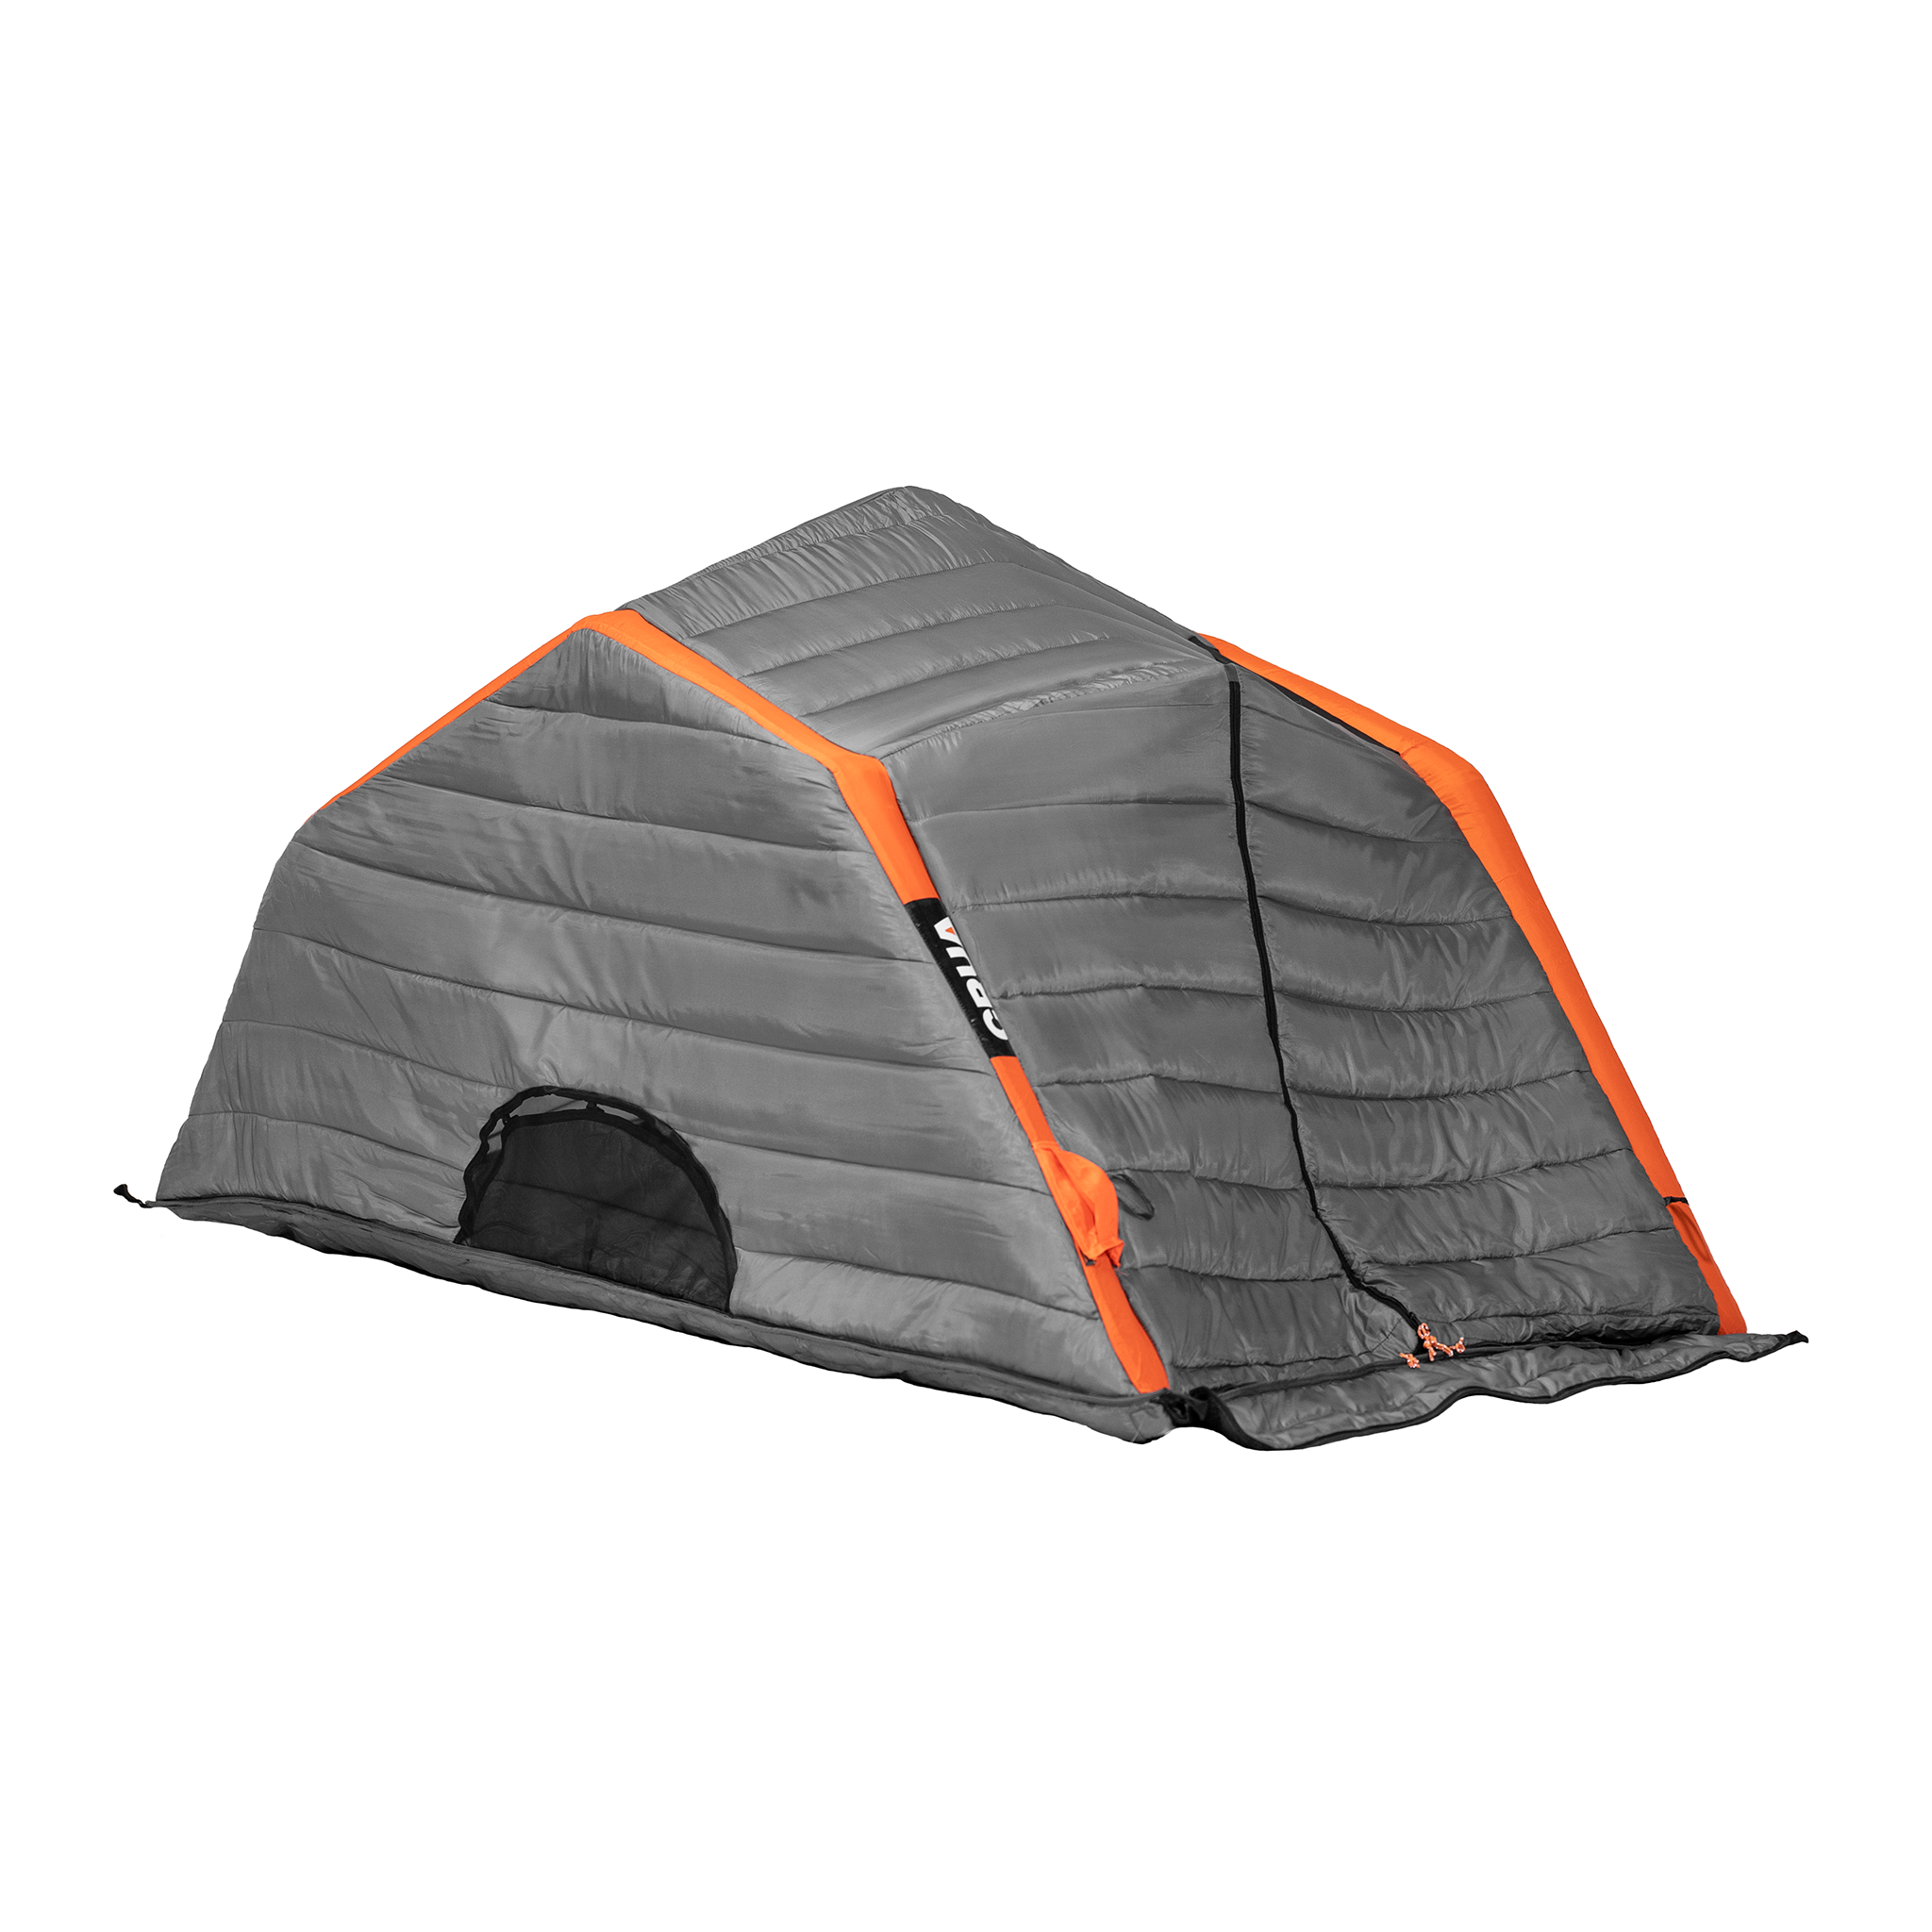 Culla Haul | 2 Person Insulated Inner Tent With Temperature Regulating, Noise Dampening And Light Blocking Features